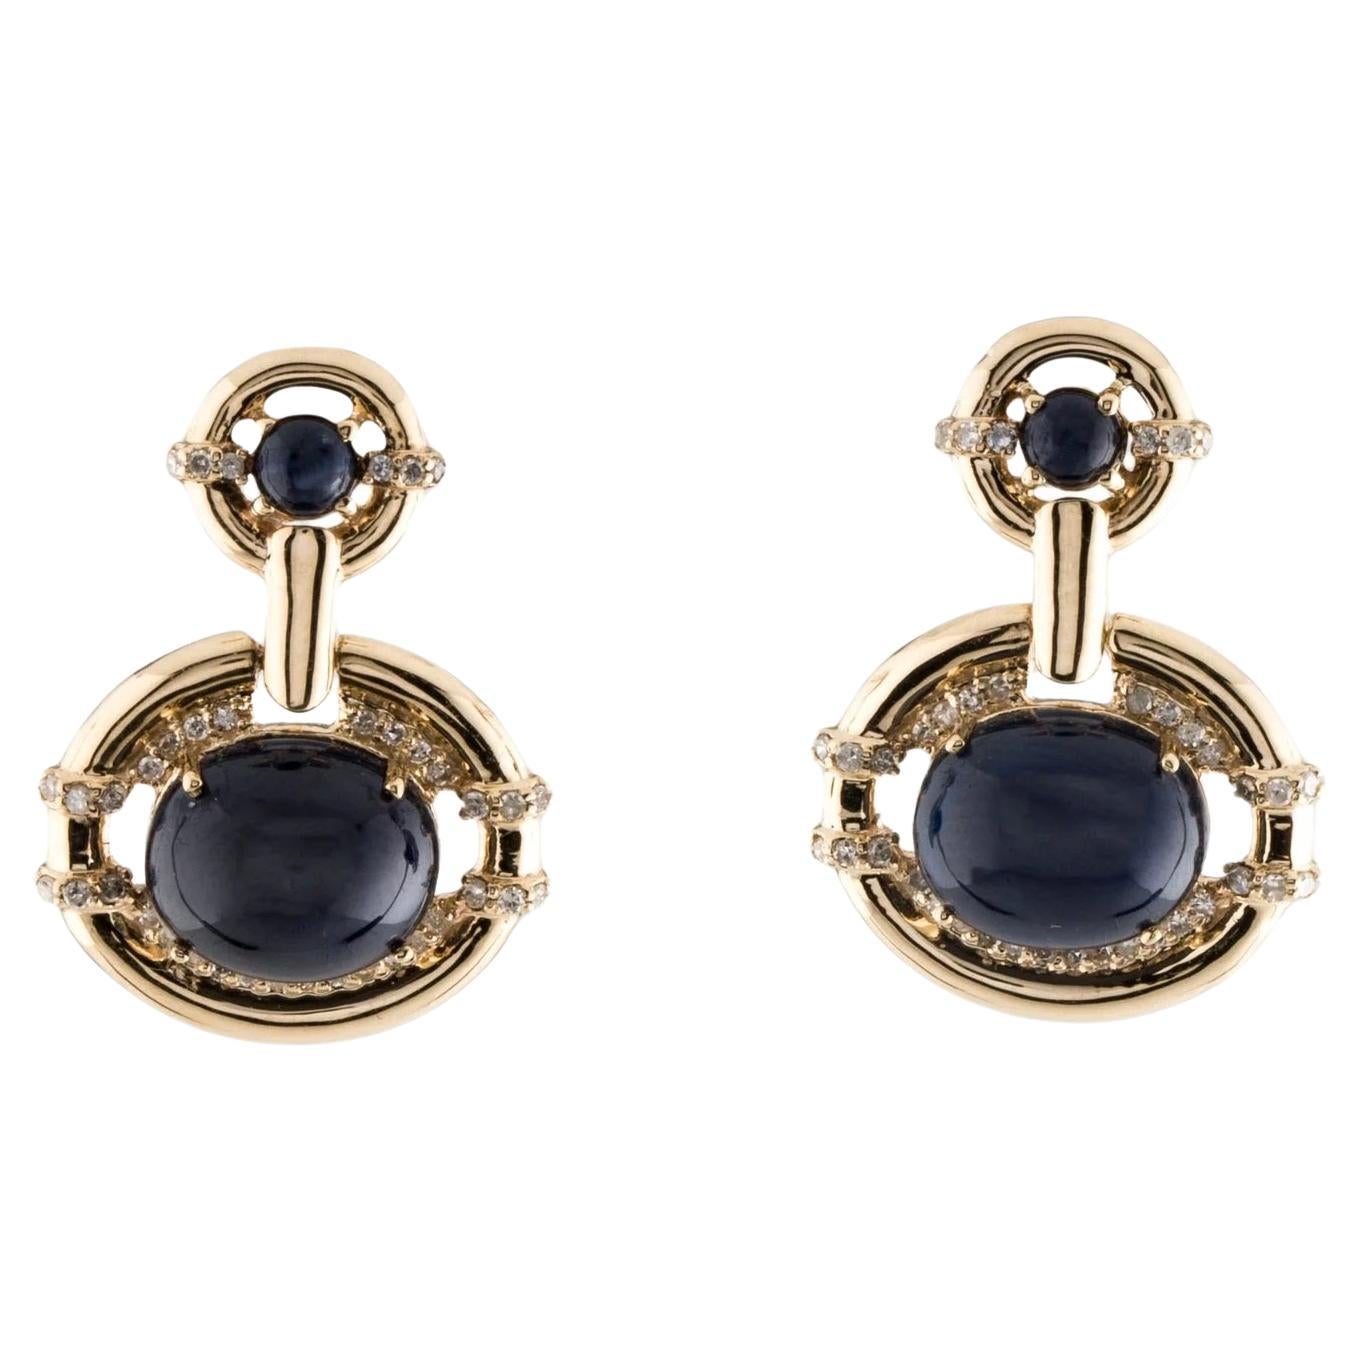 14K Sapphire & Diamond Drop Earrings with 0.72ct Sapphire Cabochons & 0.34ct Dia